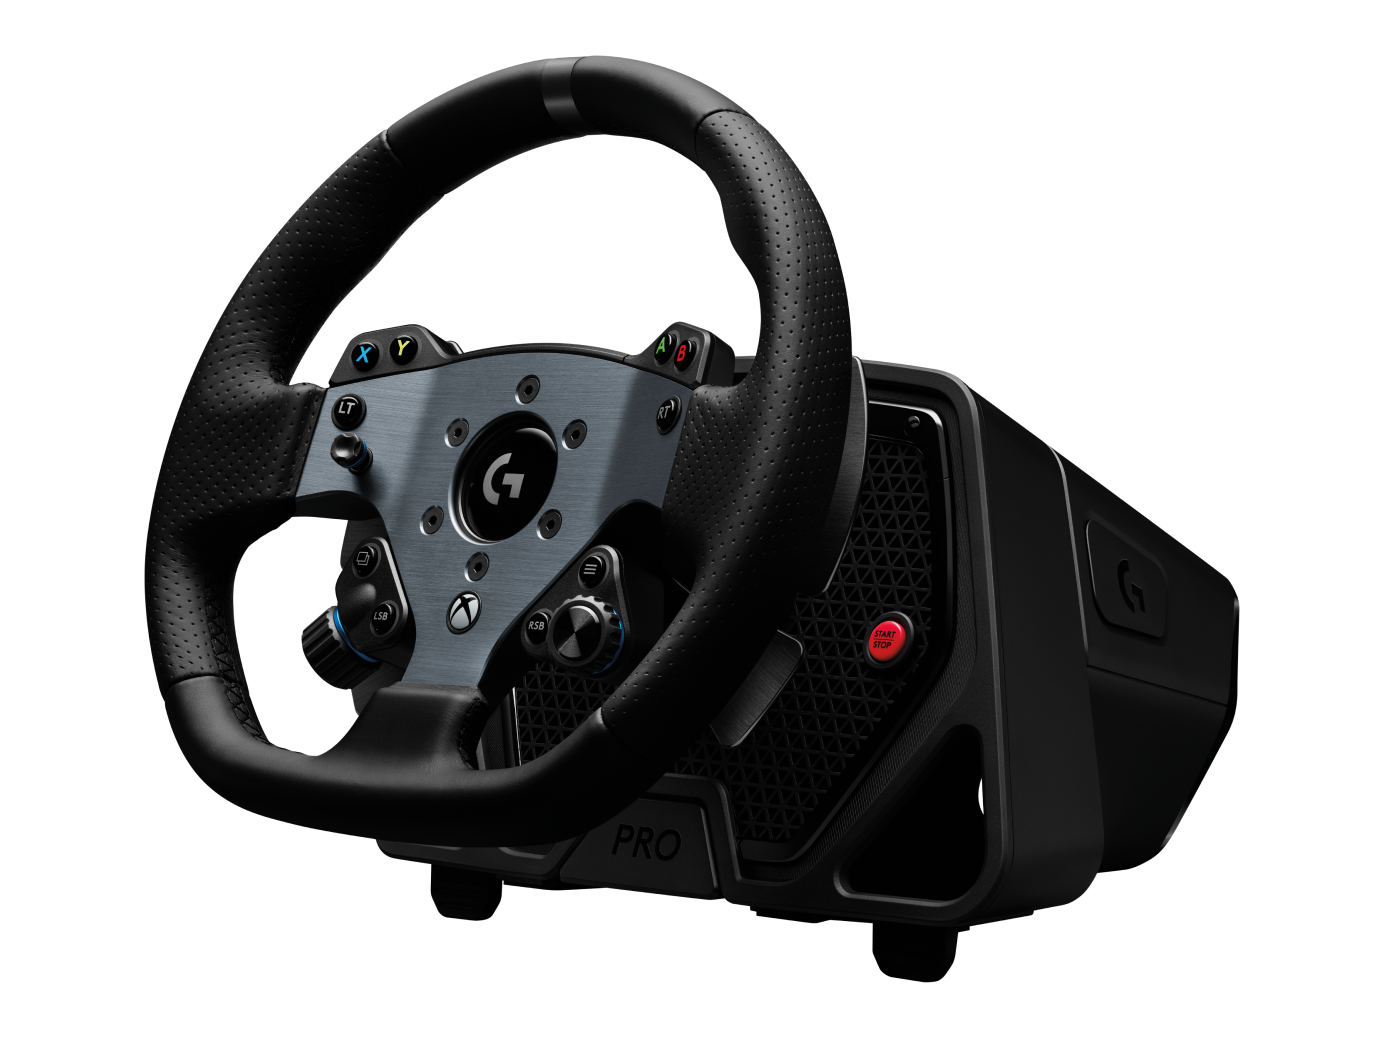 Image of PRO RACING WHEEL Direct Drive and TRUEFORCE feedback technology for PC, PlayStation or Xbox. Xbox/PC